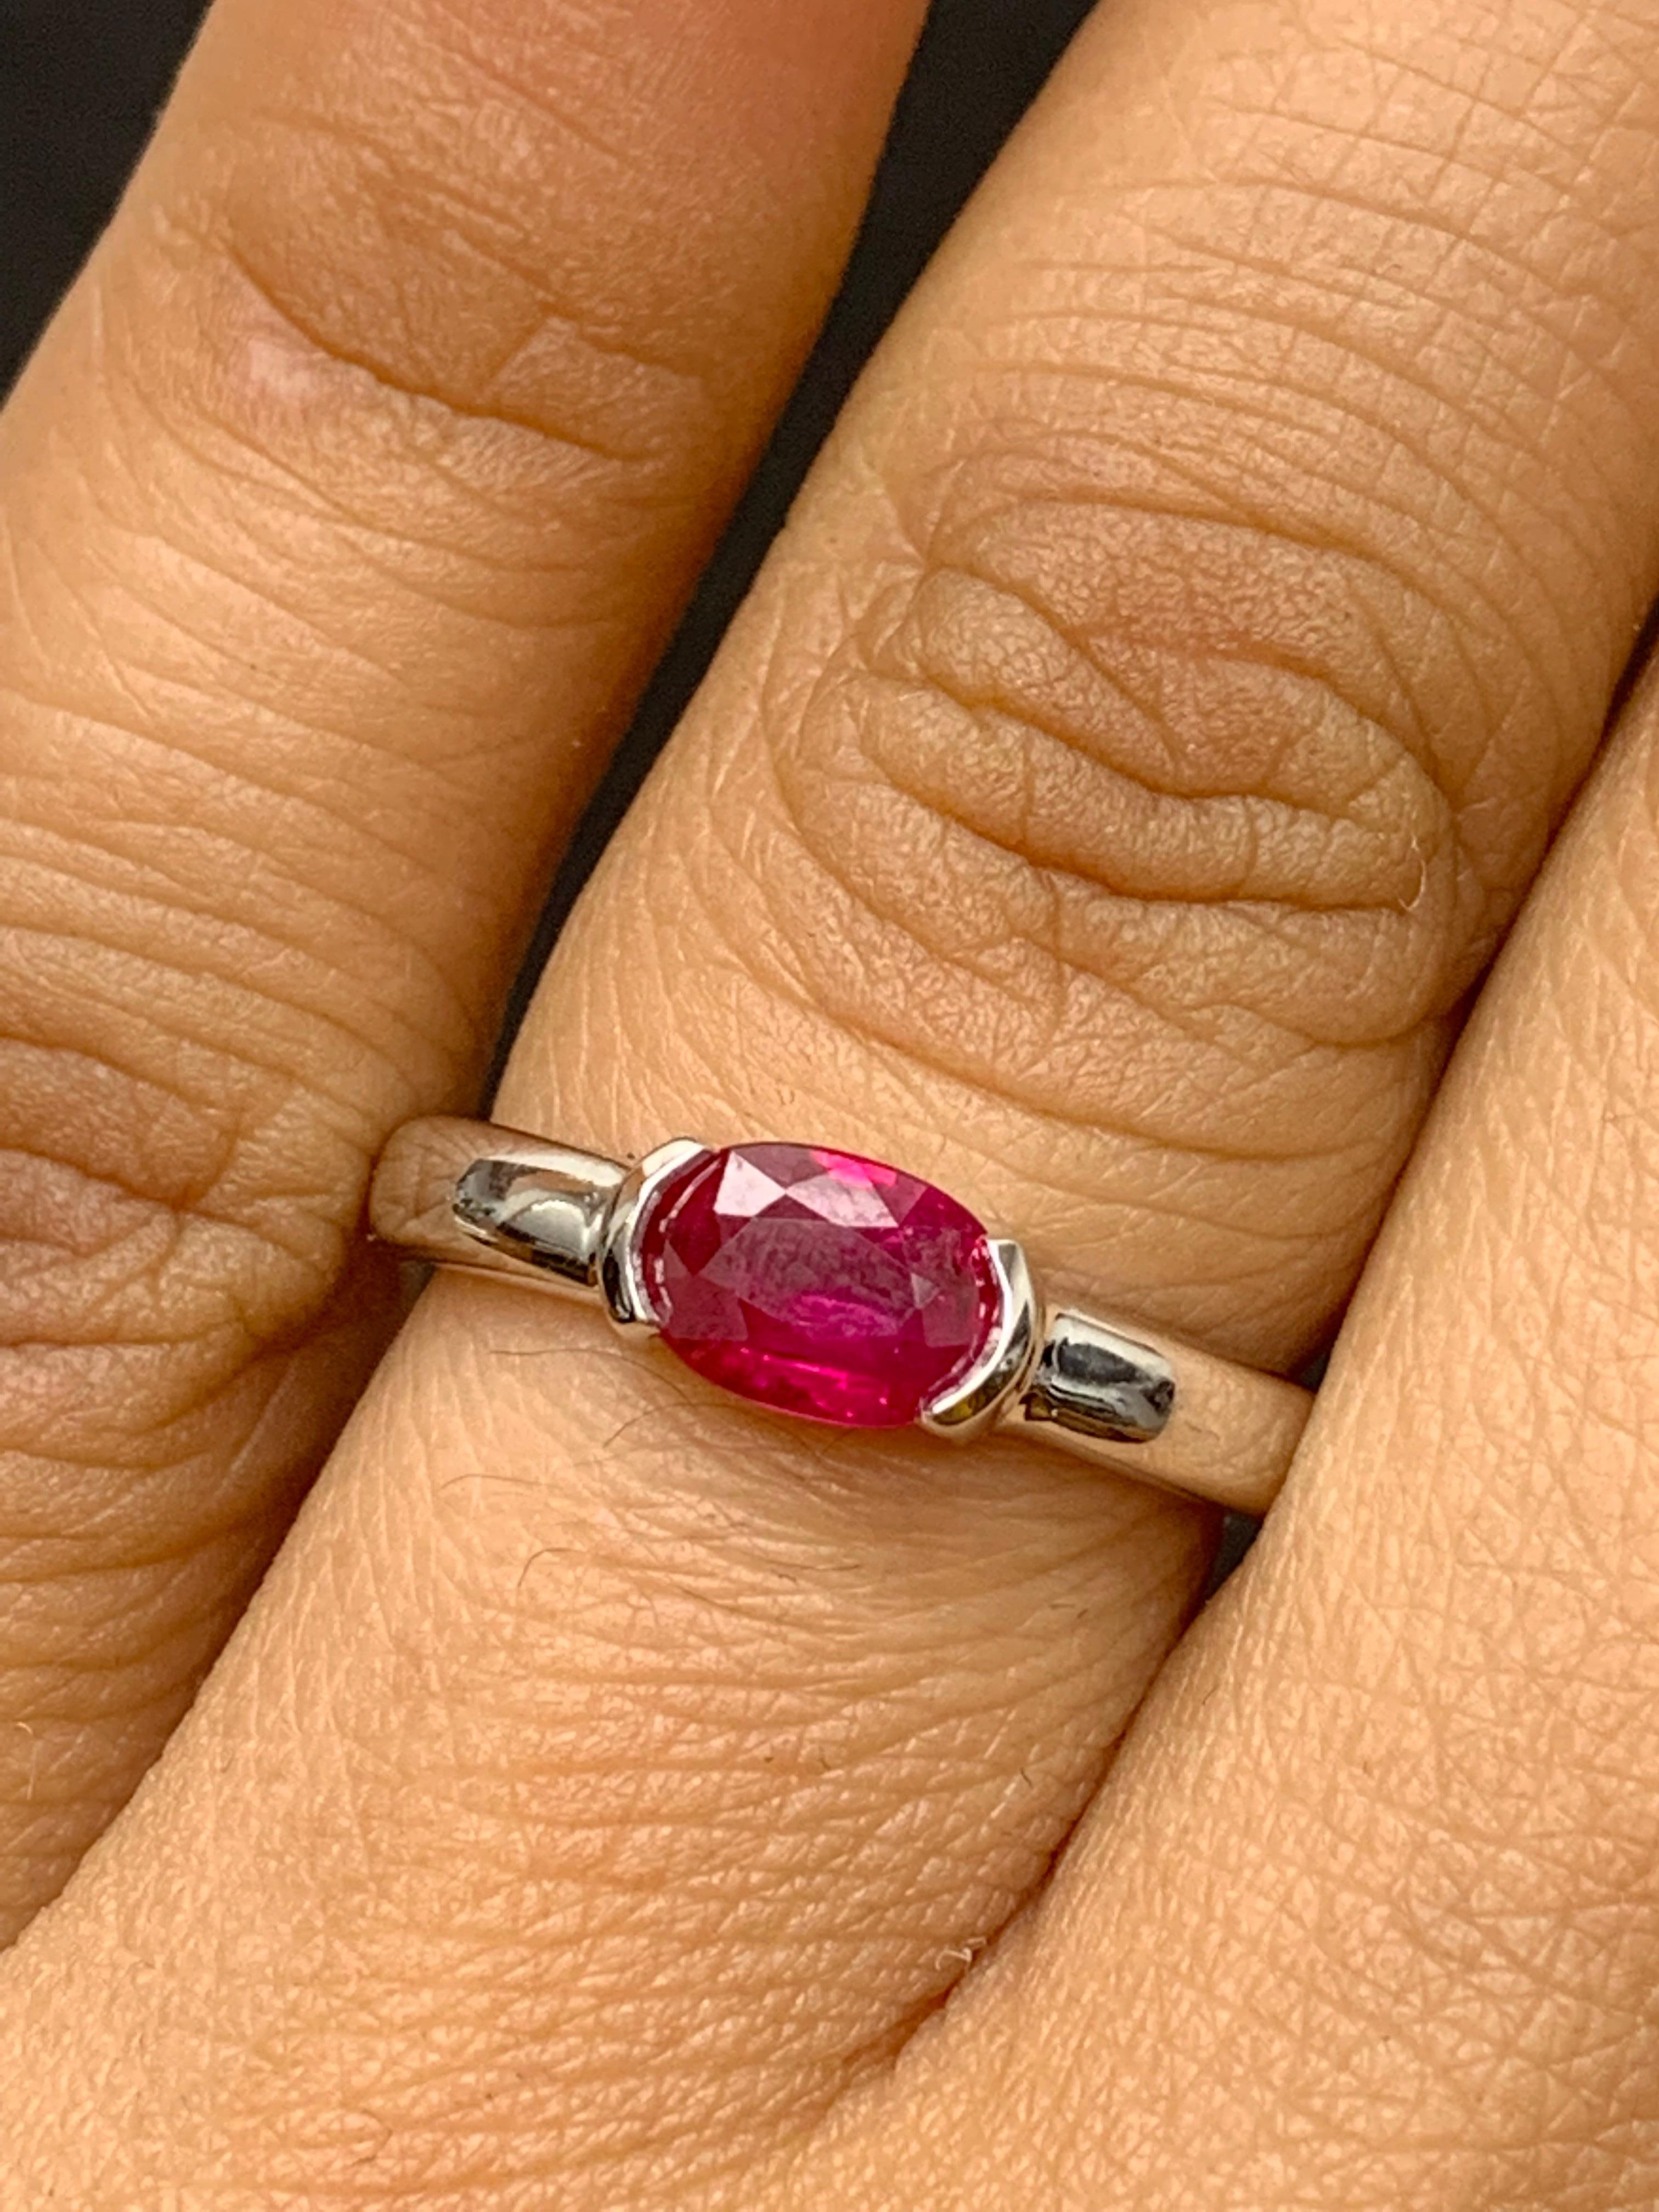 An elegant wedding band ring featuring an astonishing 0.78-carat oval cut ruby, set in a beautiful wide 14K white gold band. 

Style is available in different price ranges. Prices are based on your selection. Don't hesitate to get in touch with us